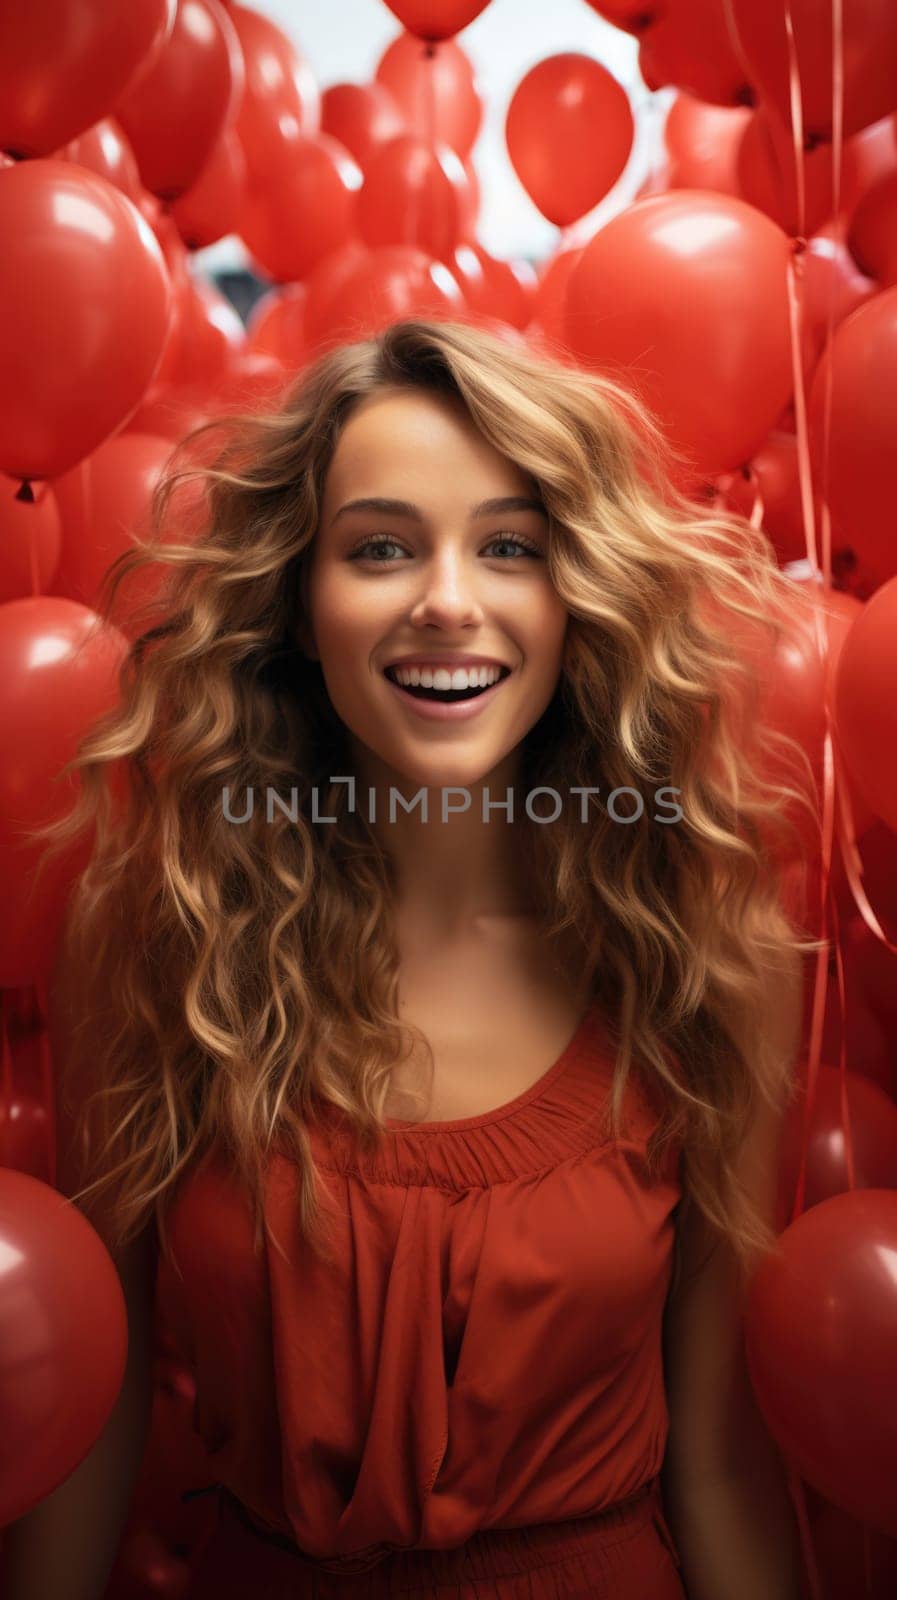 A woman stands in front of a bunch of red balloons in a cheerful celebration setting.